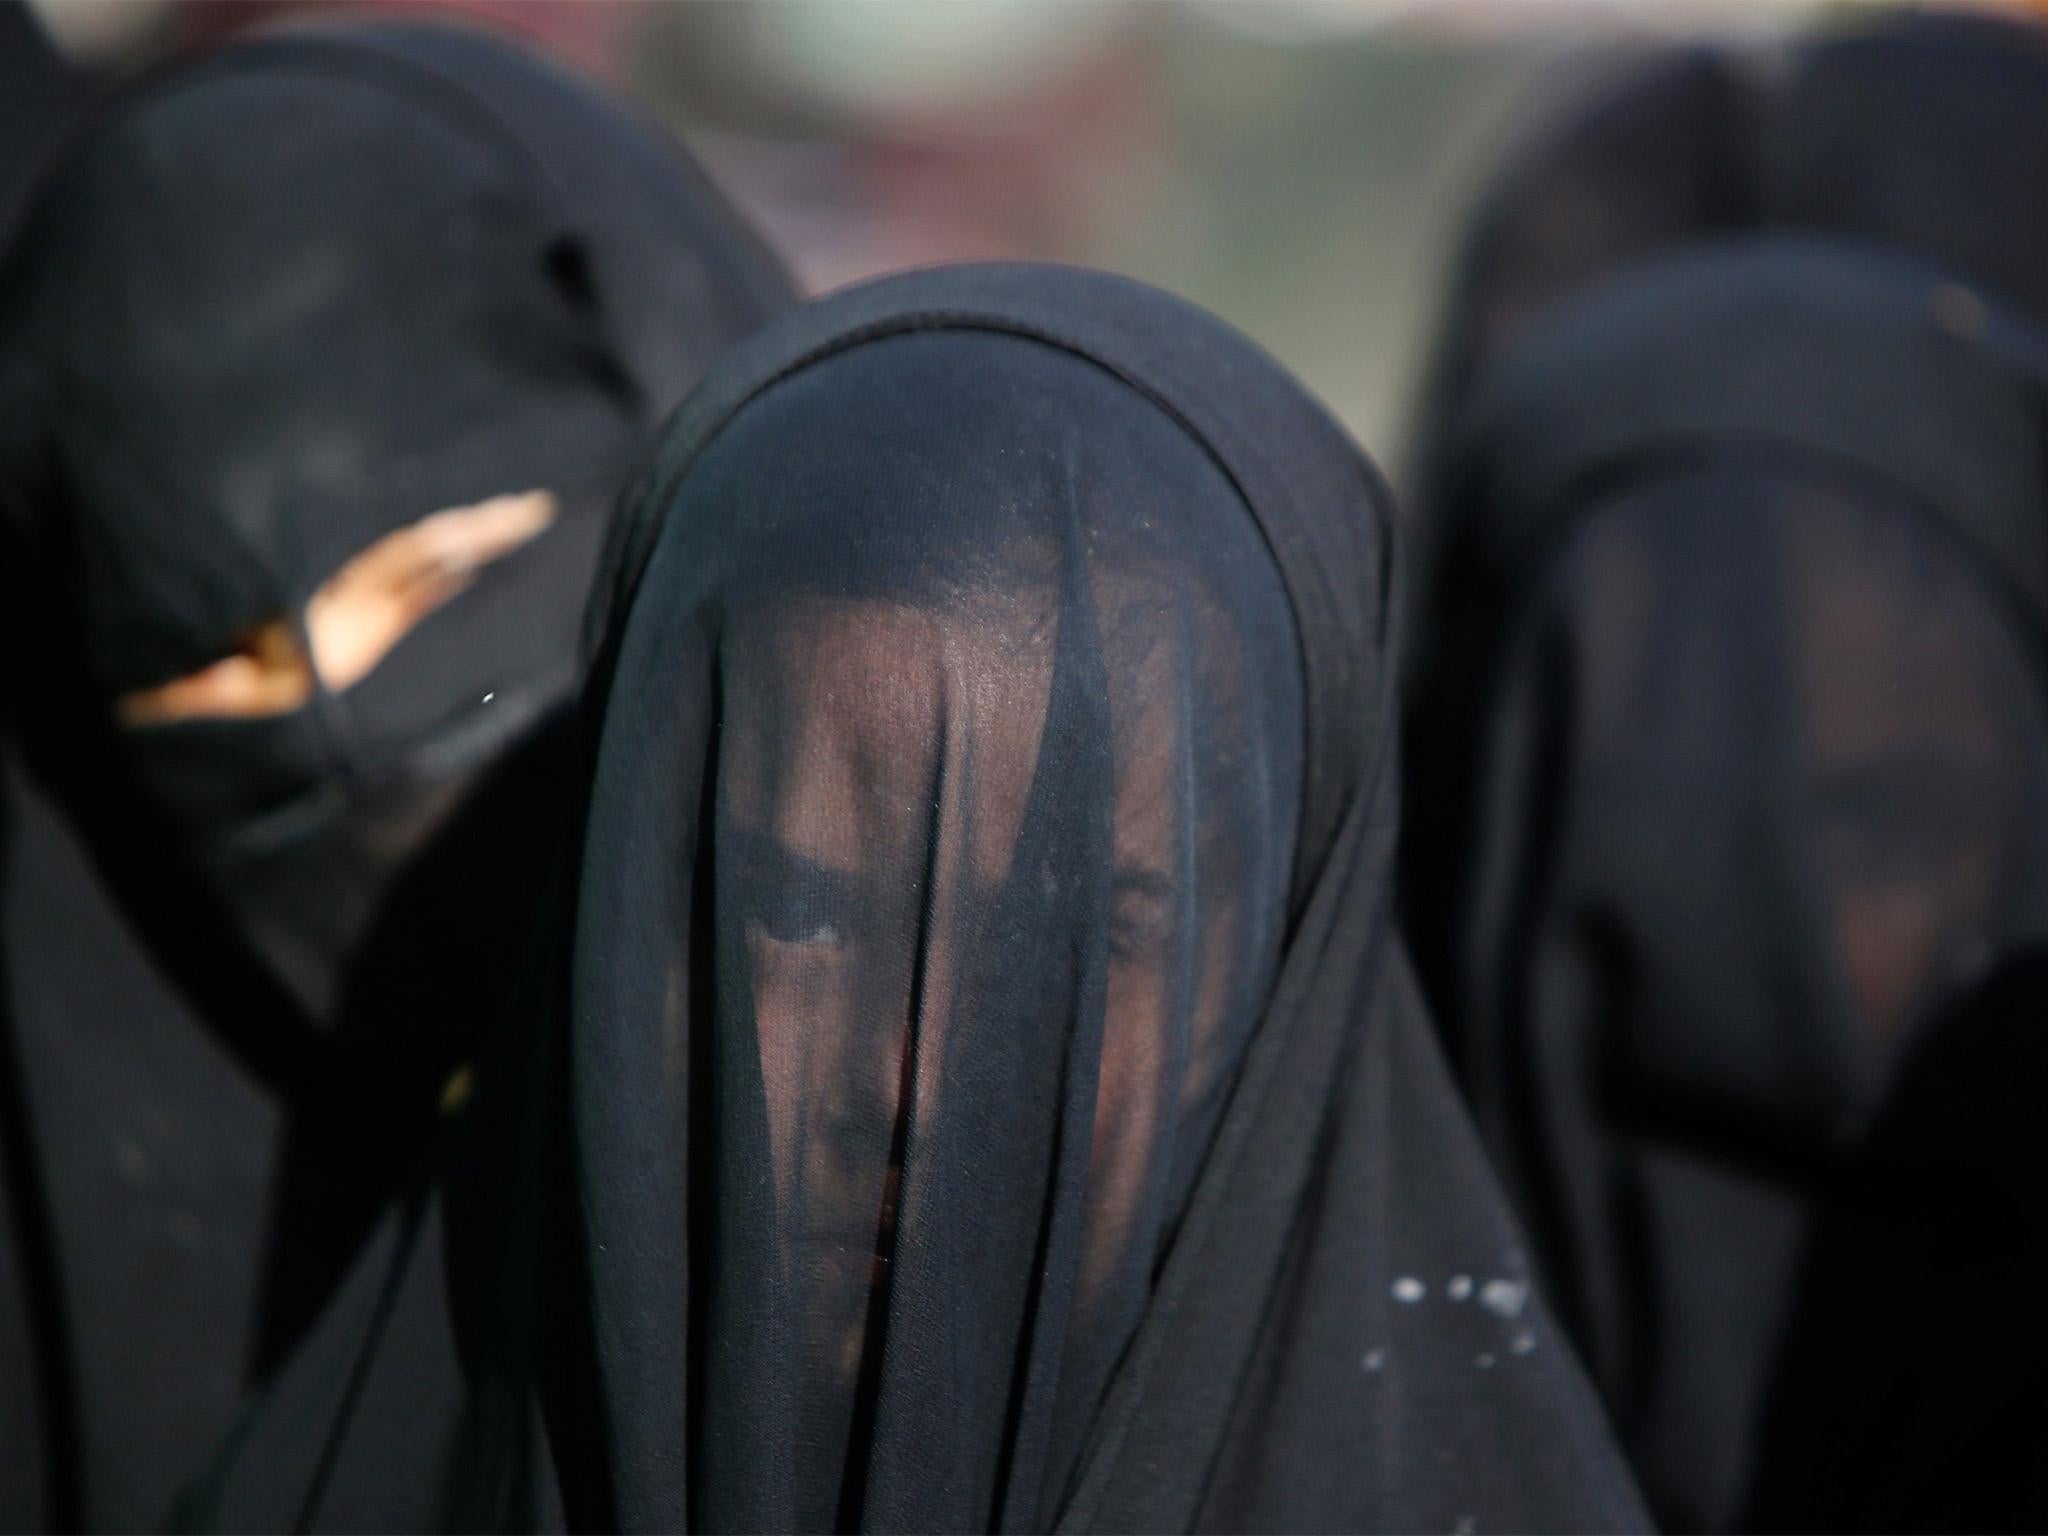 Isis has become more violent and cruel, especially towards women